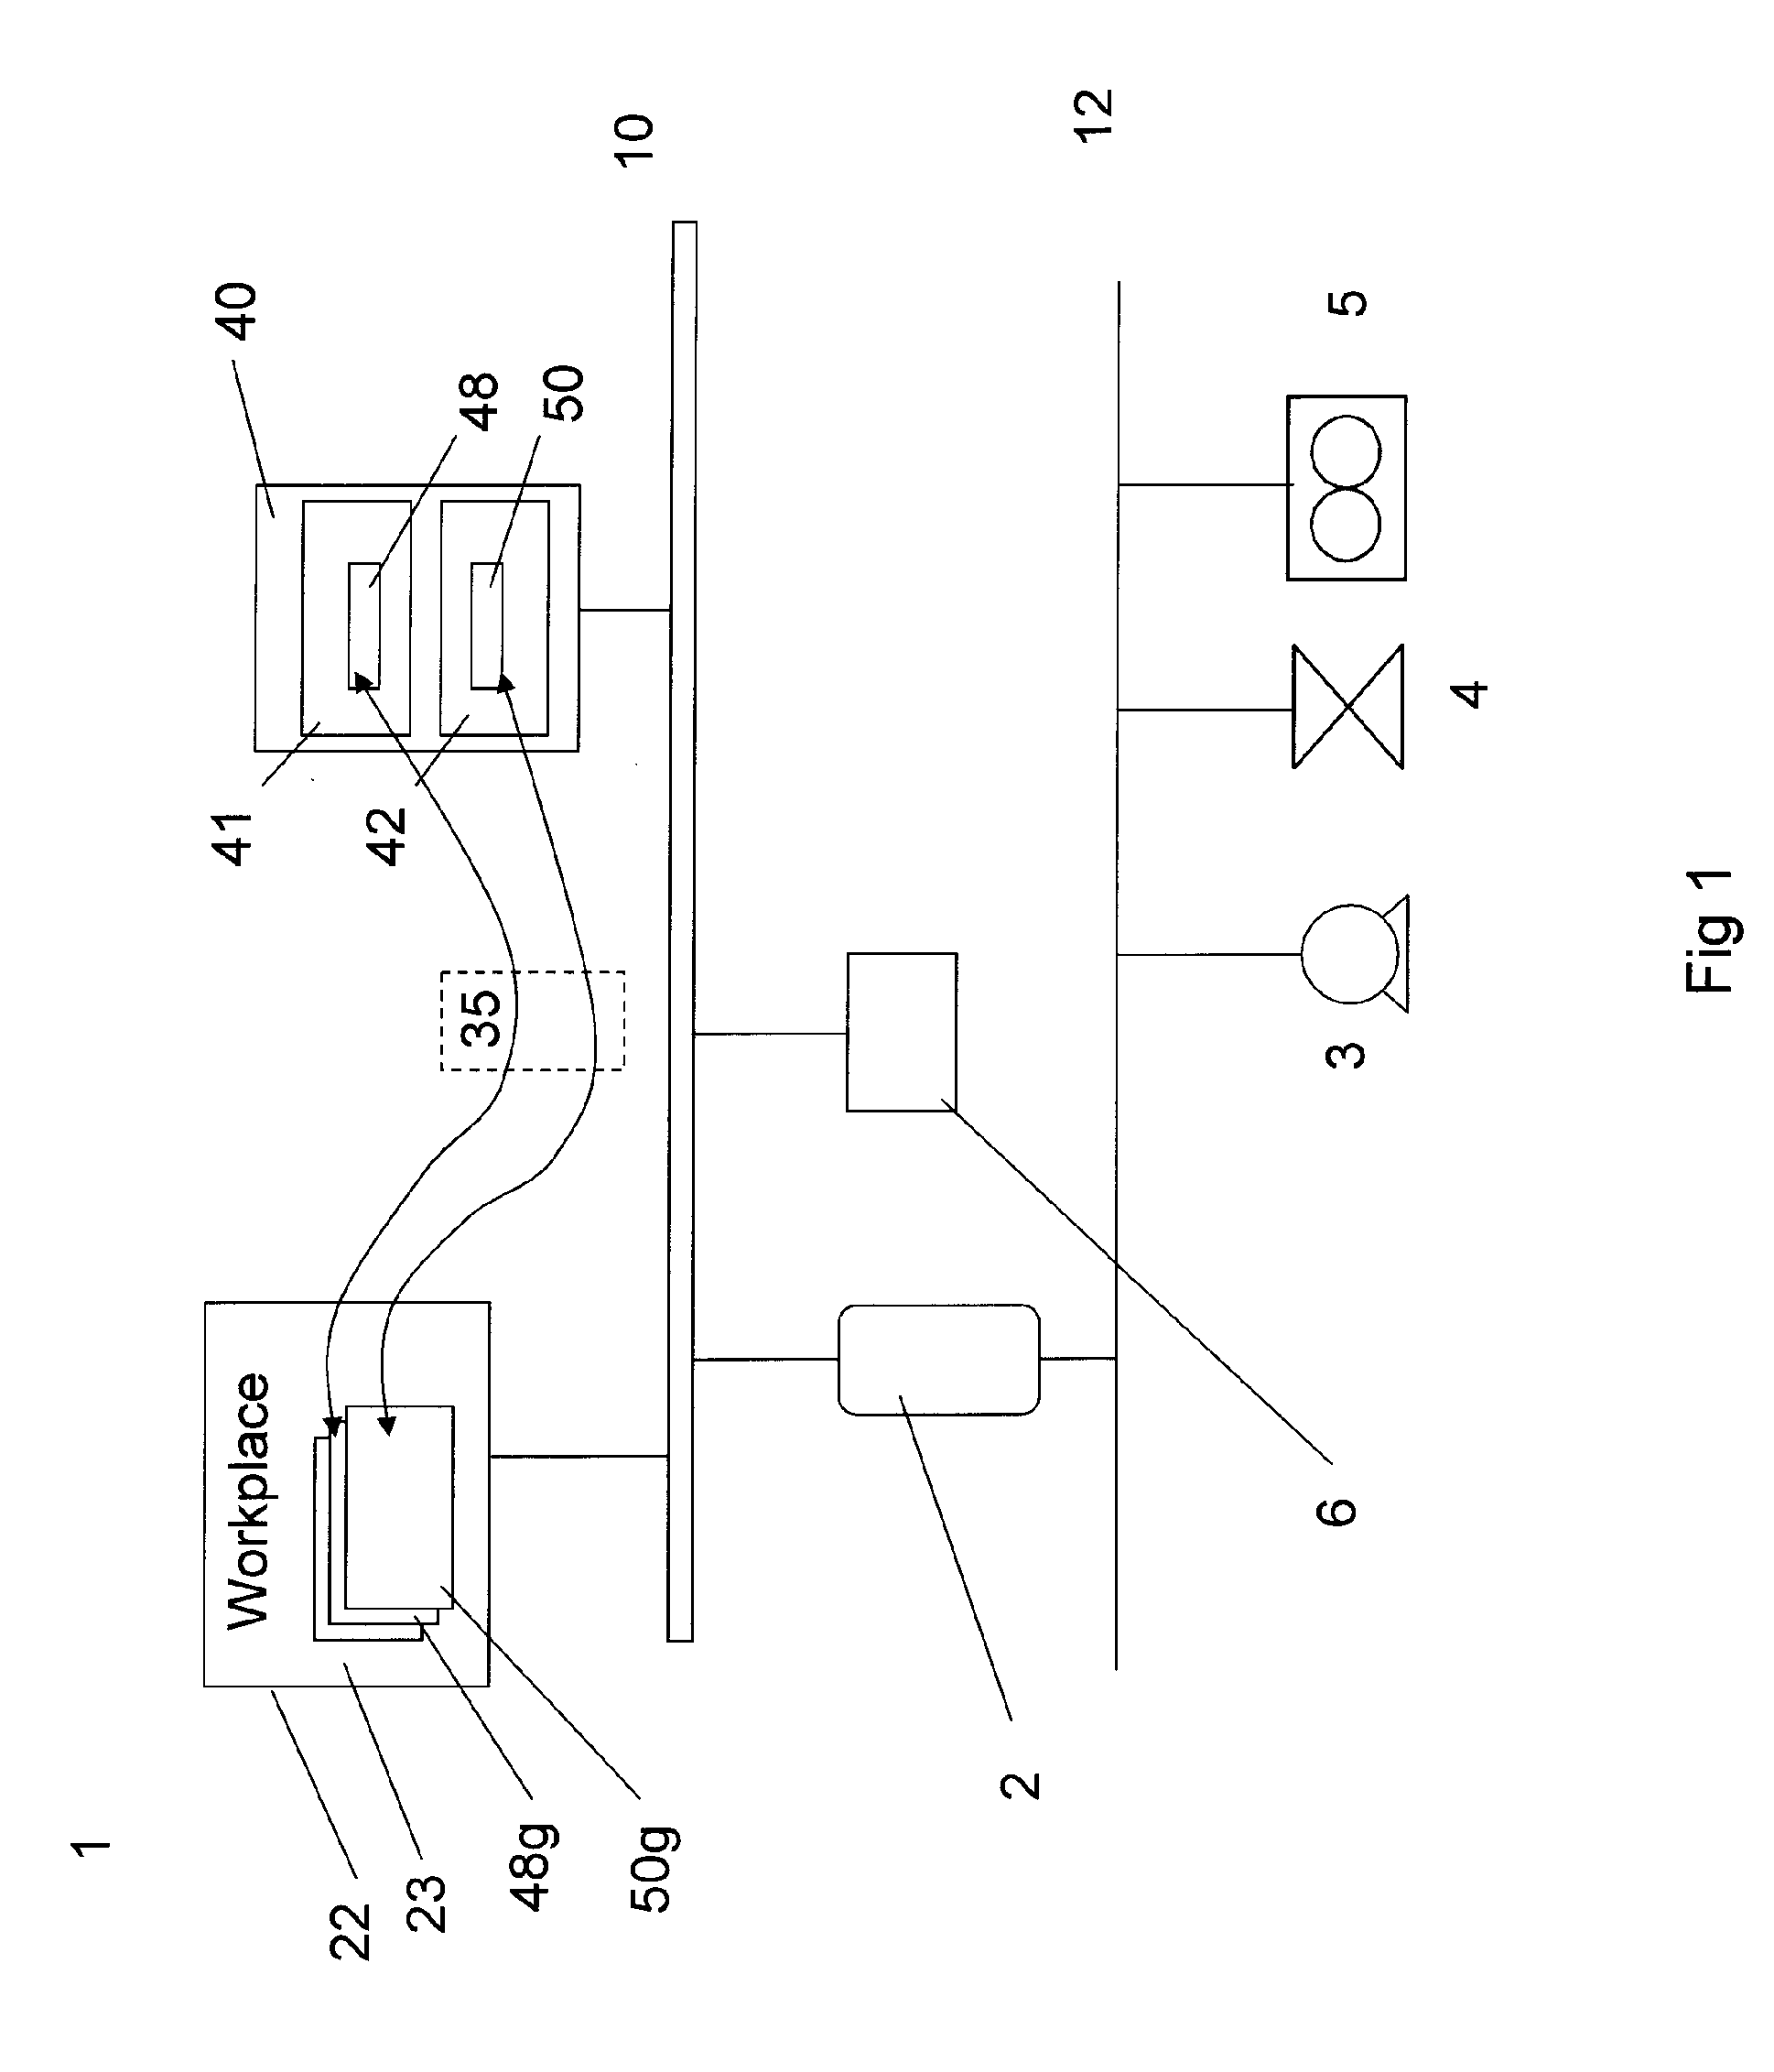 Method For Control In A Process Control System Implemented In Part By One Or More Computer Implemented Run-Time Processes